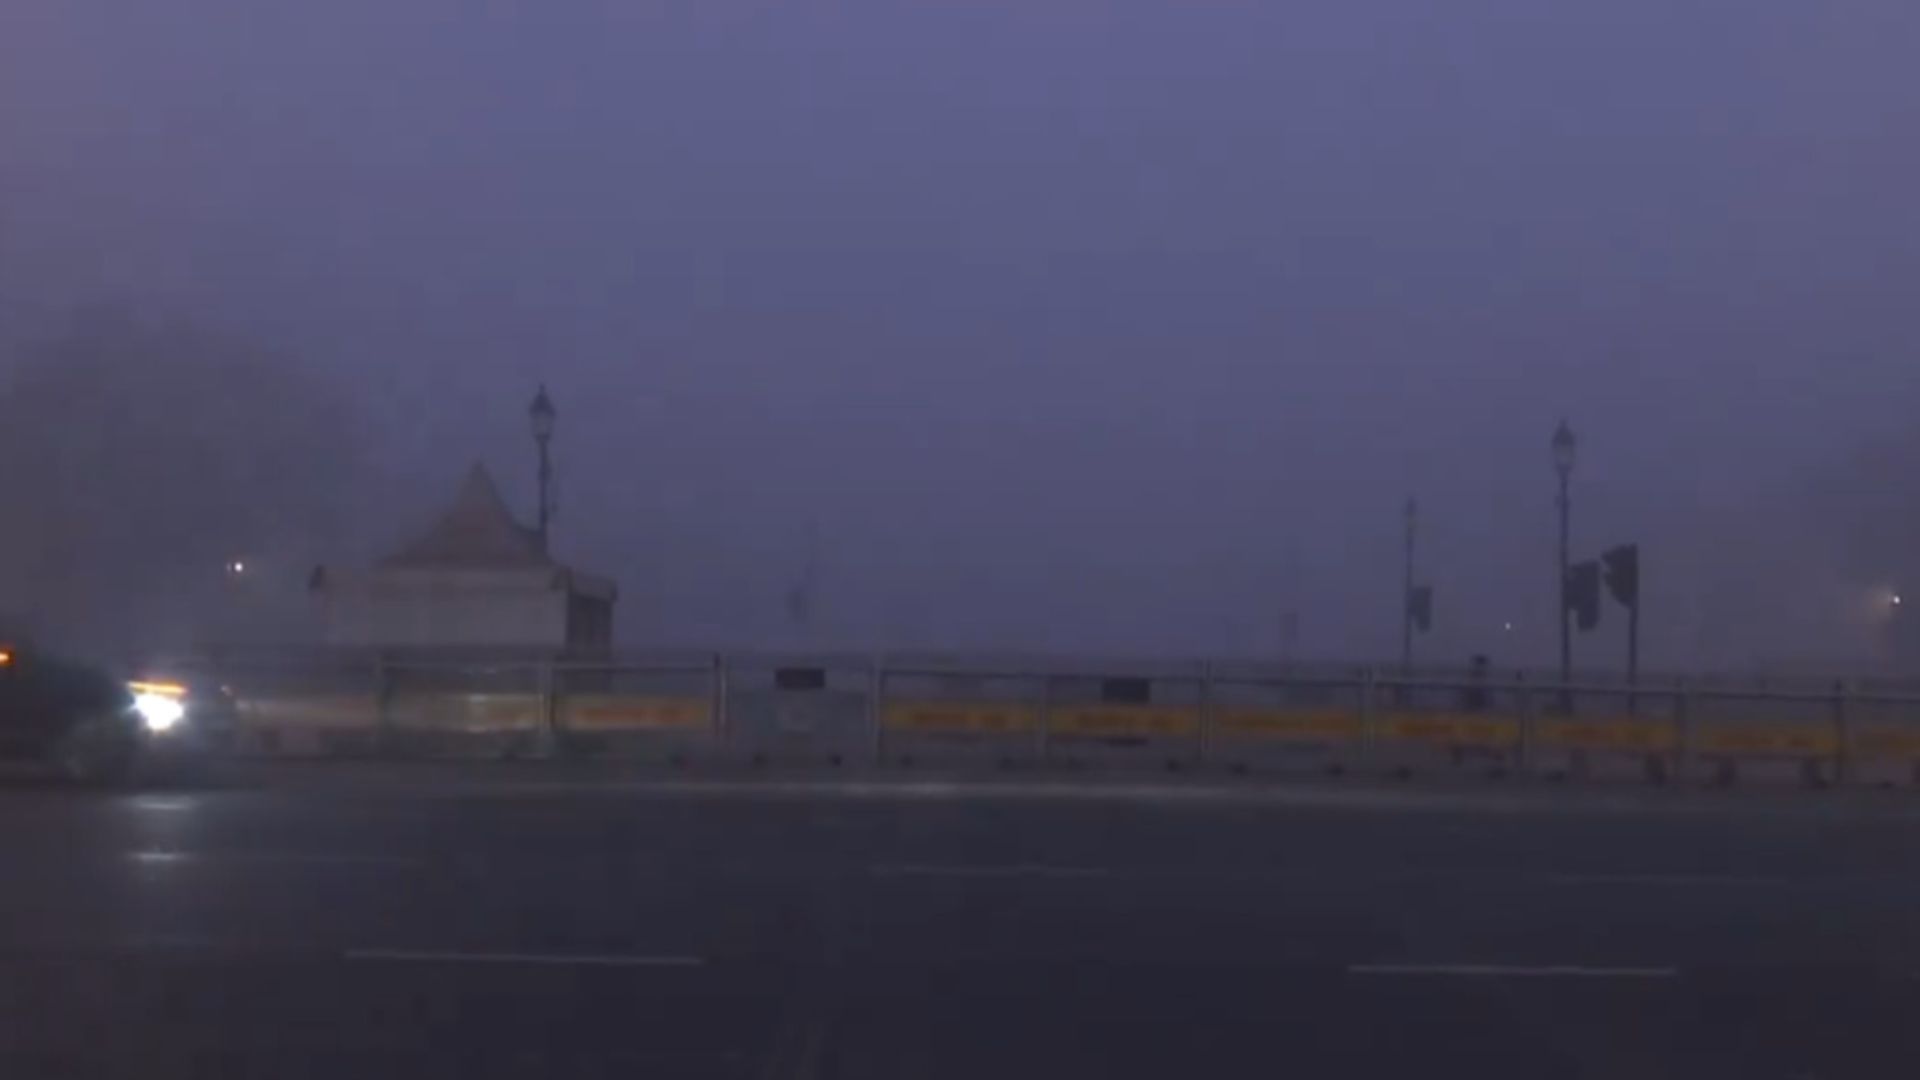 Delhi waking up to freezing temperatures, dense fog reduces visibility and causes flight delays Sunday morning